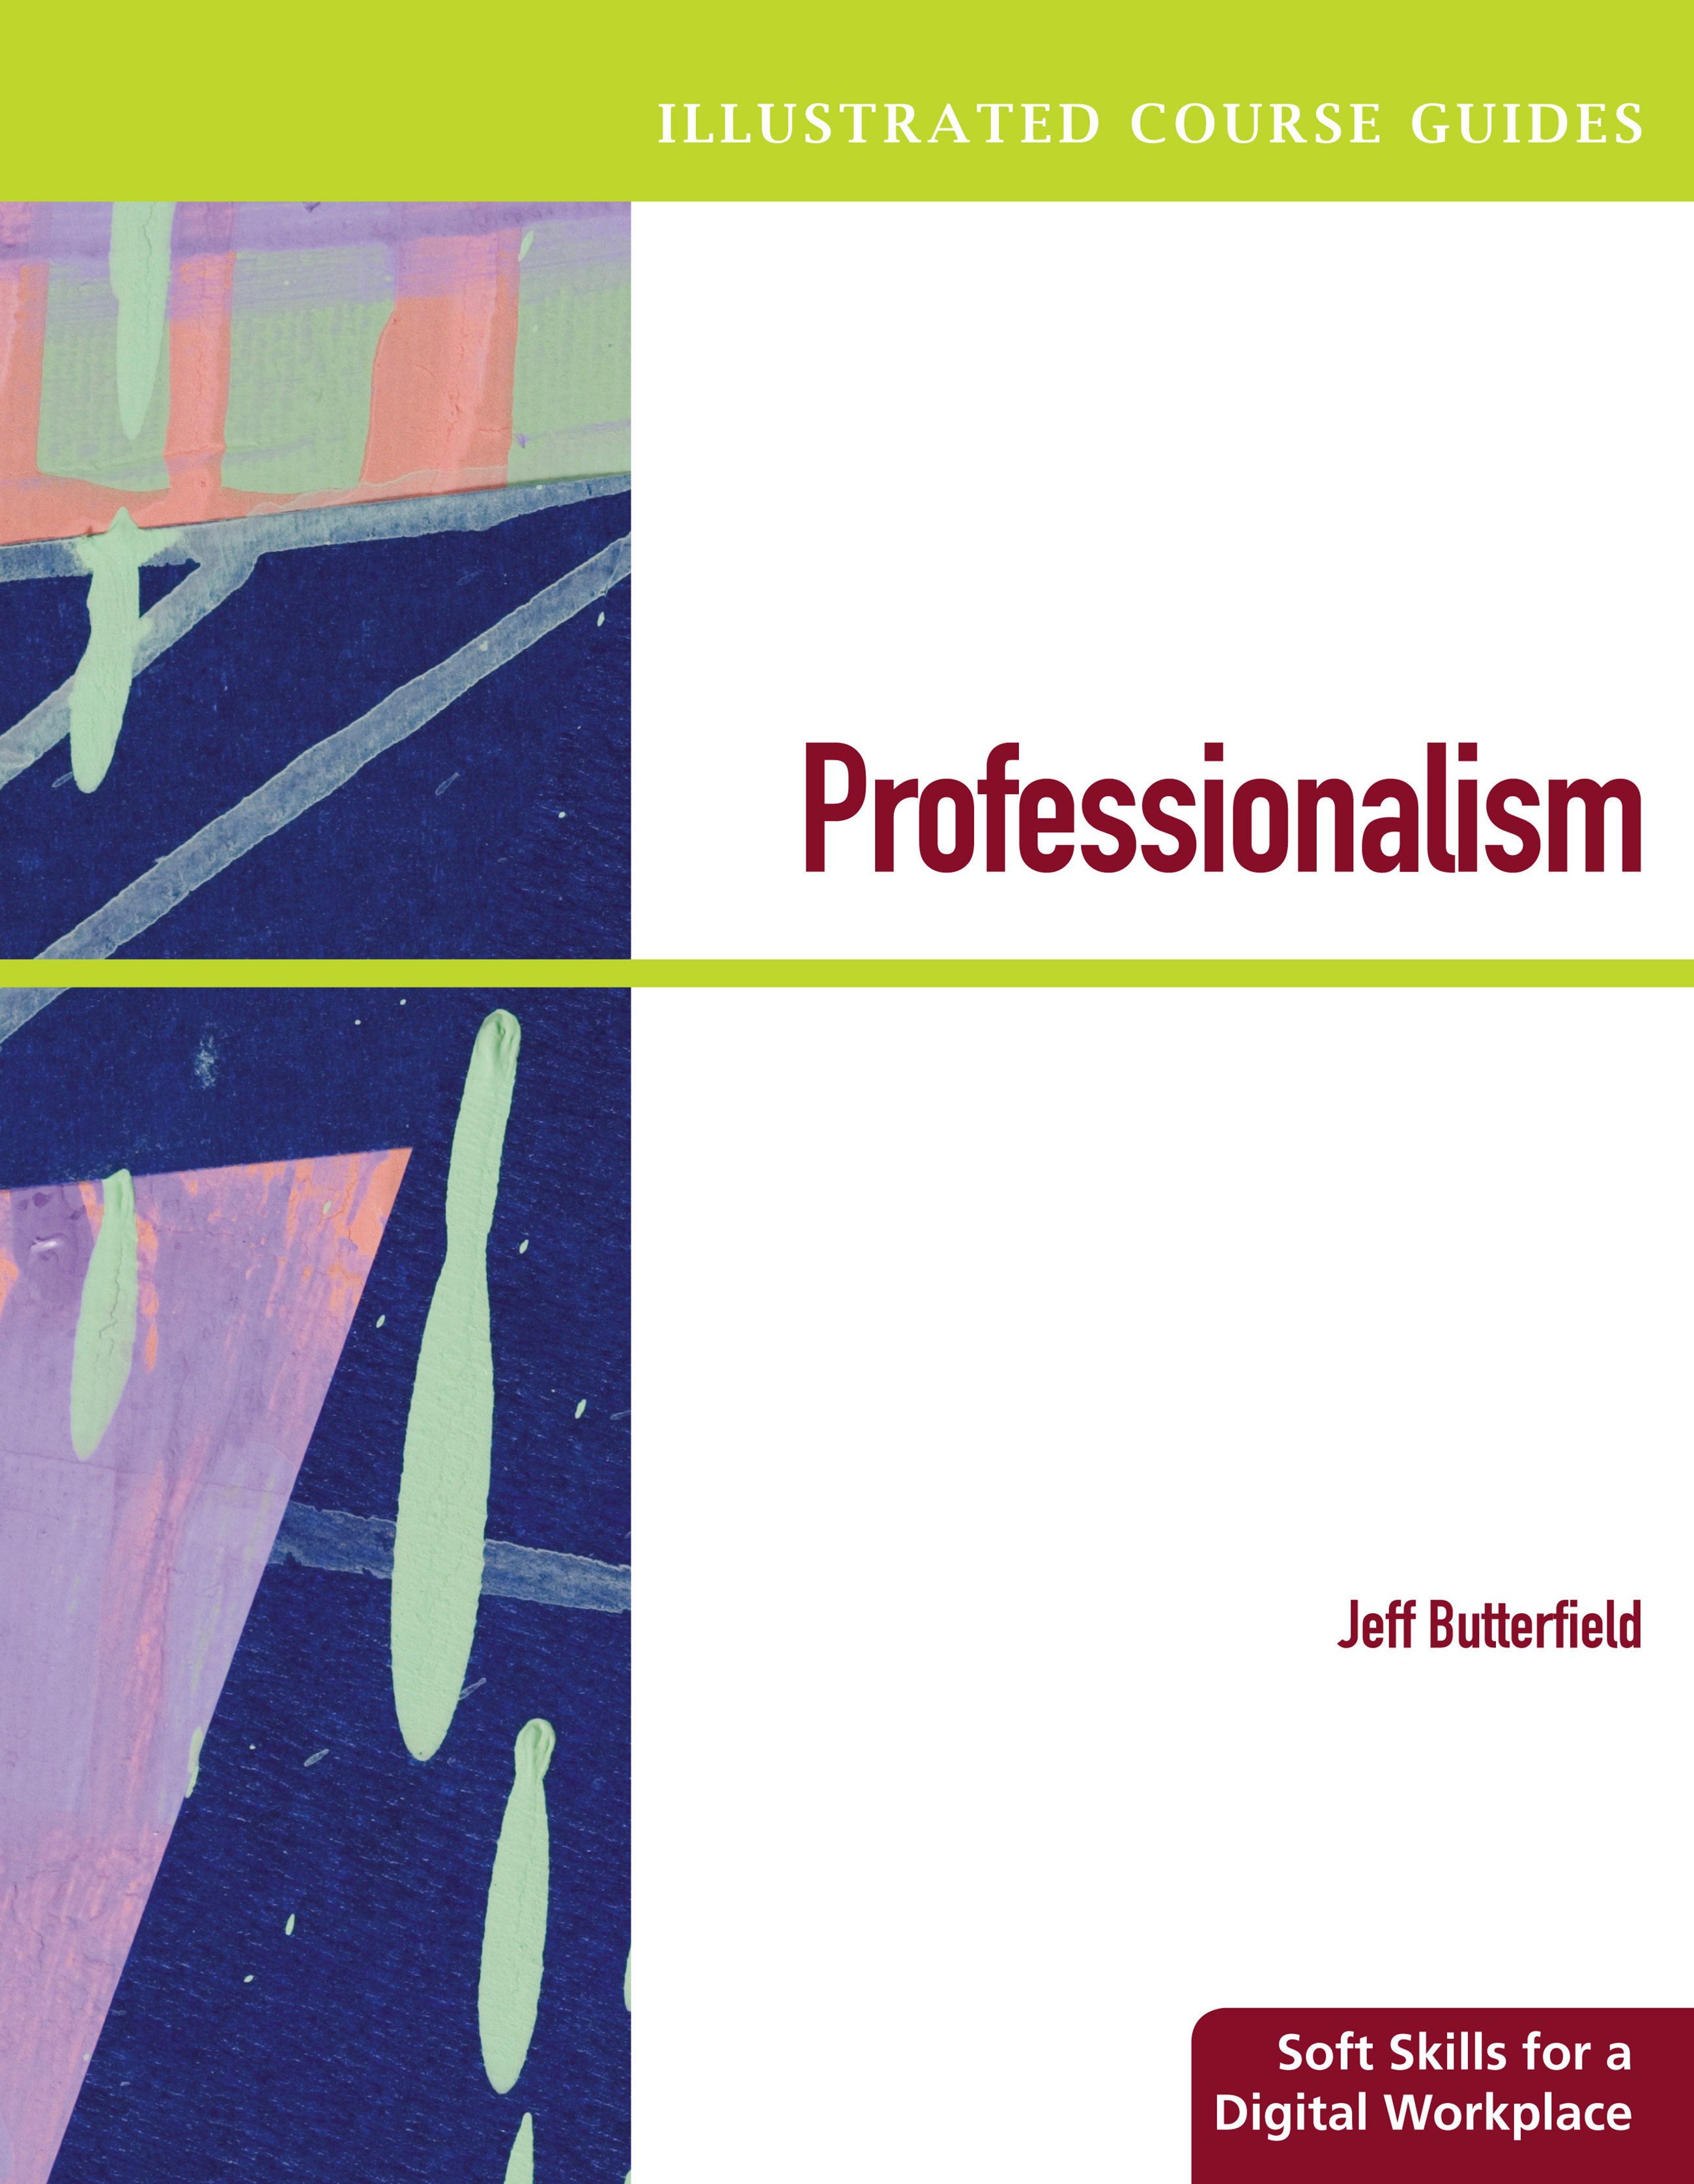 Illustrated Course Guides: Professionalism - Soft Skills for a Digital Workplace